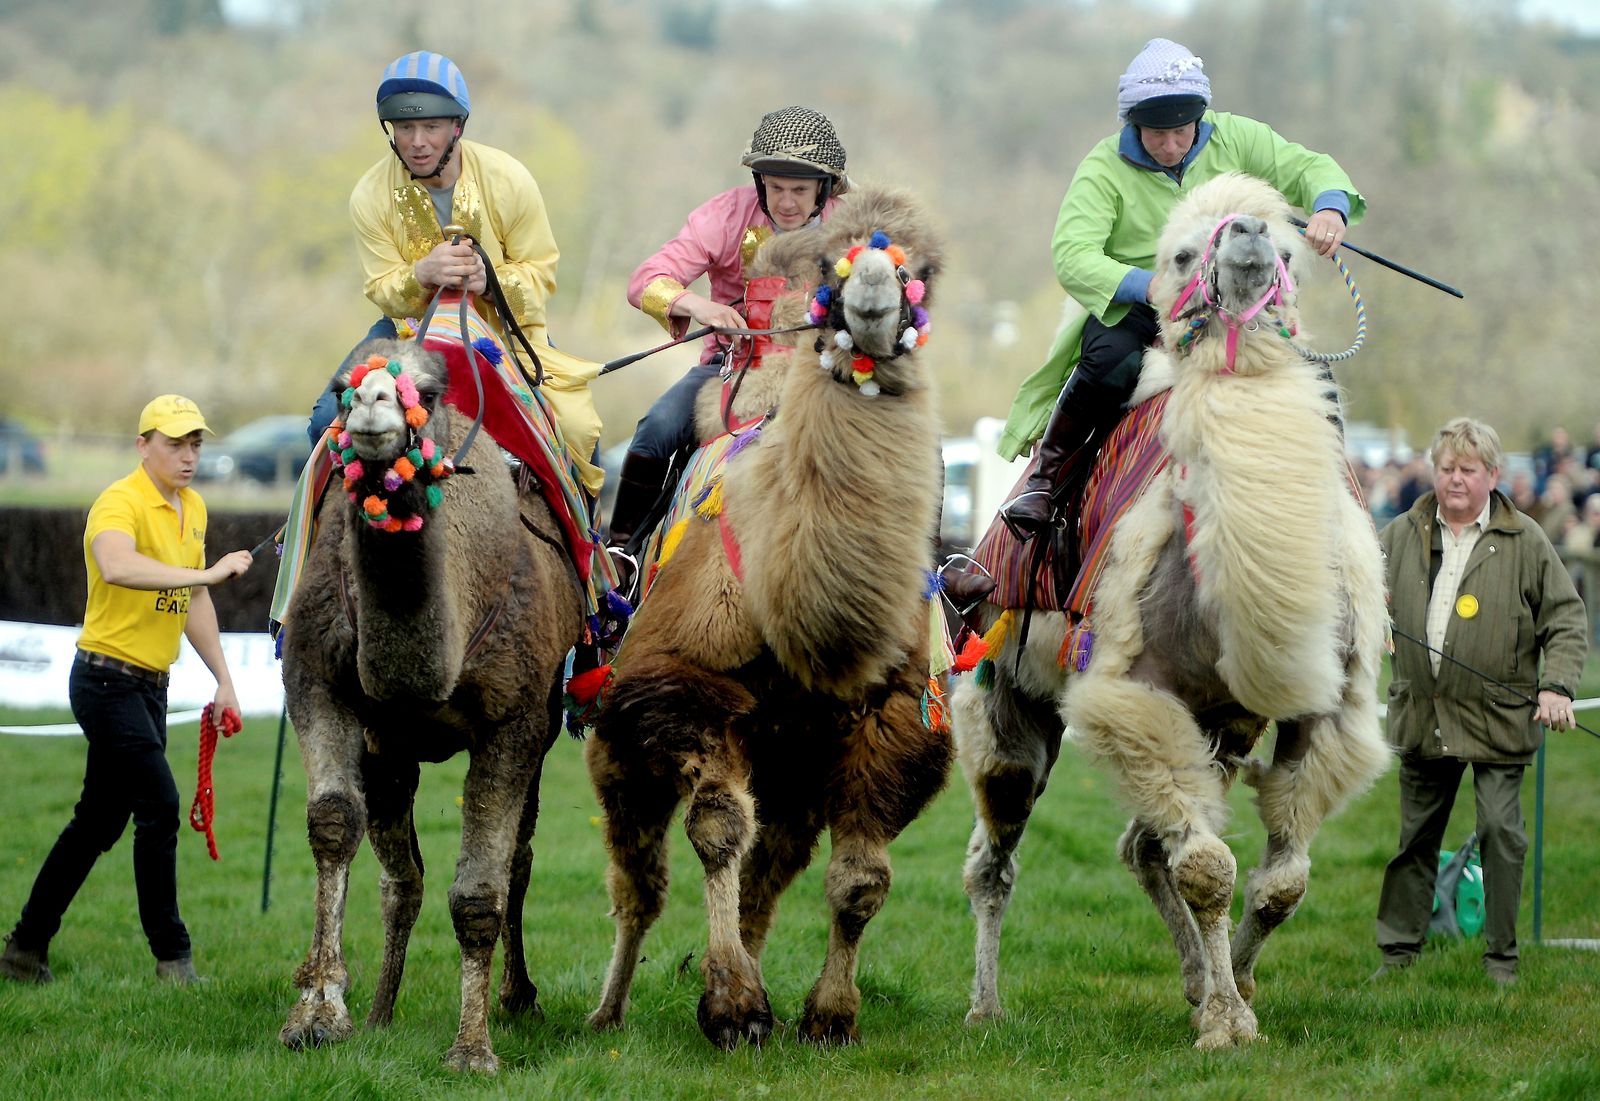 NORTH COTSWOLD HUNT POINT TO POINT CAMEL RACES EASTER MONDAY 10TH APRIL 23 PAUL NICHOLLS